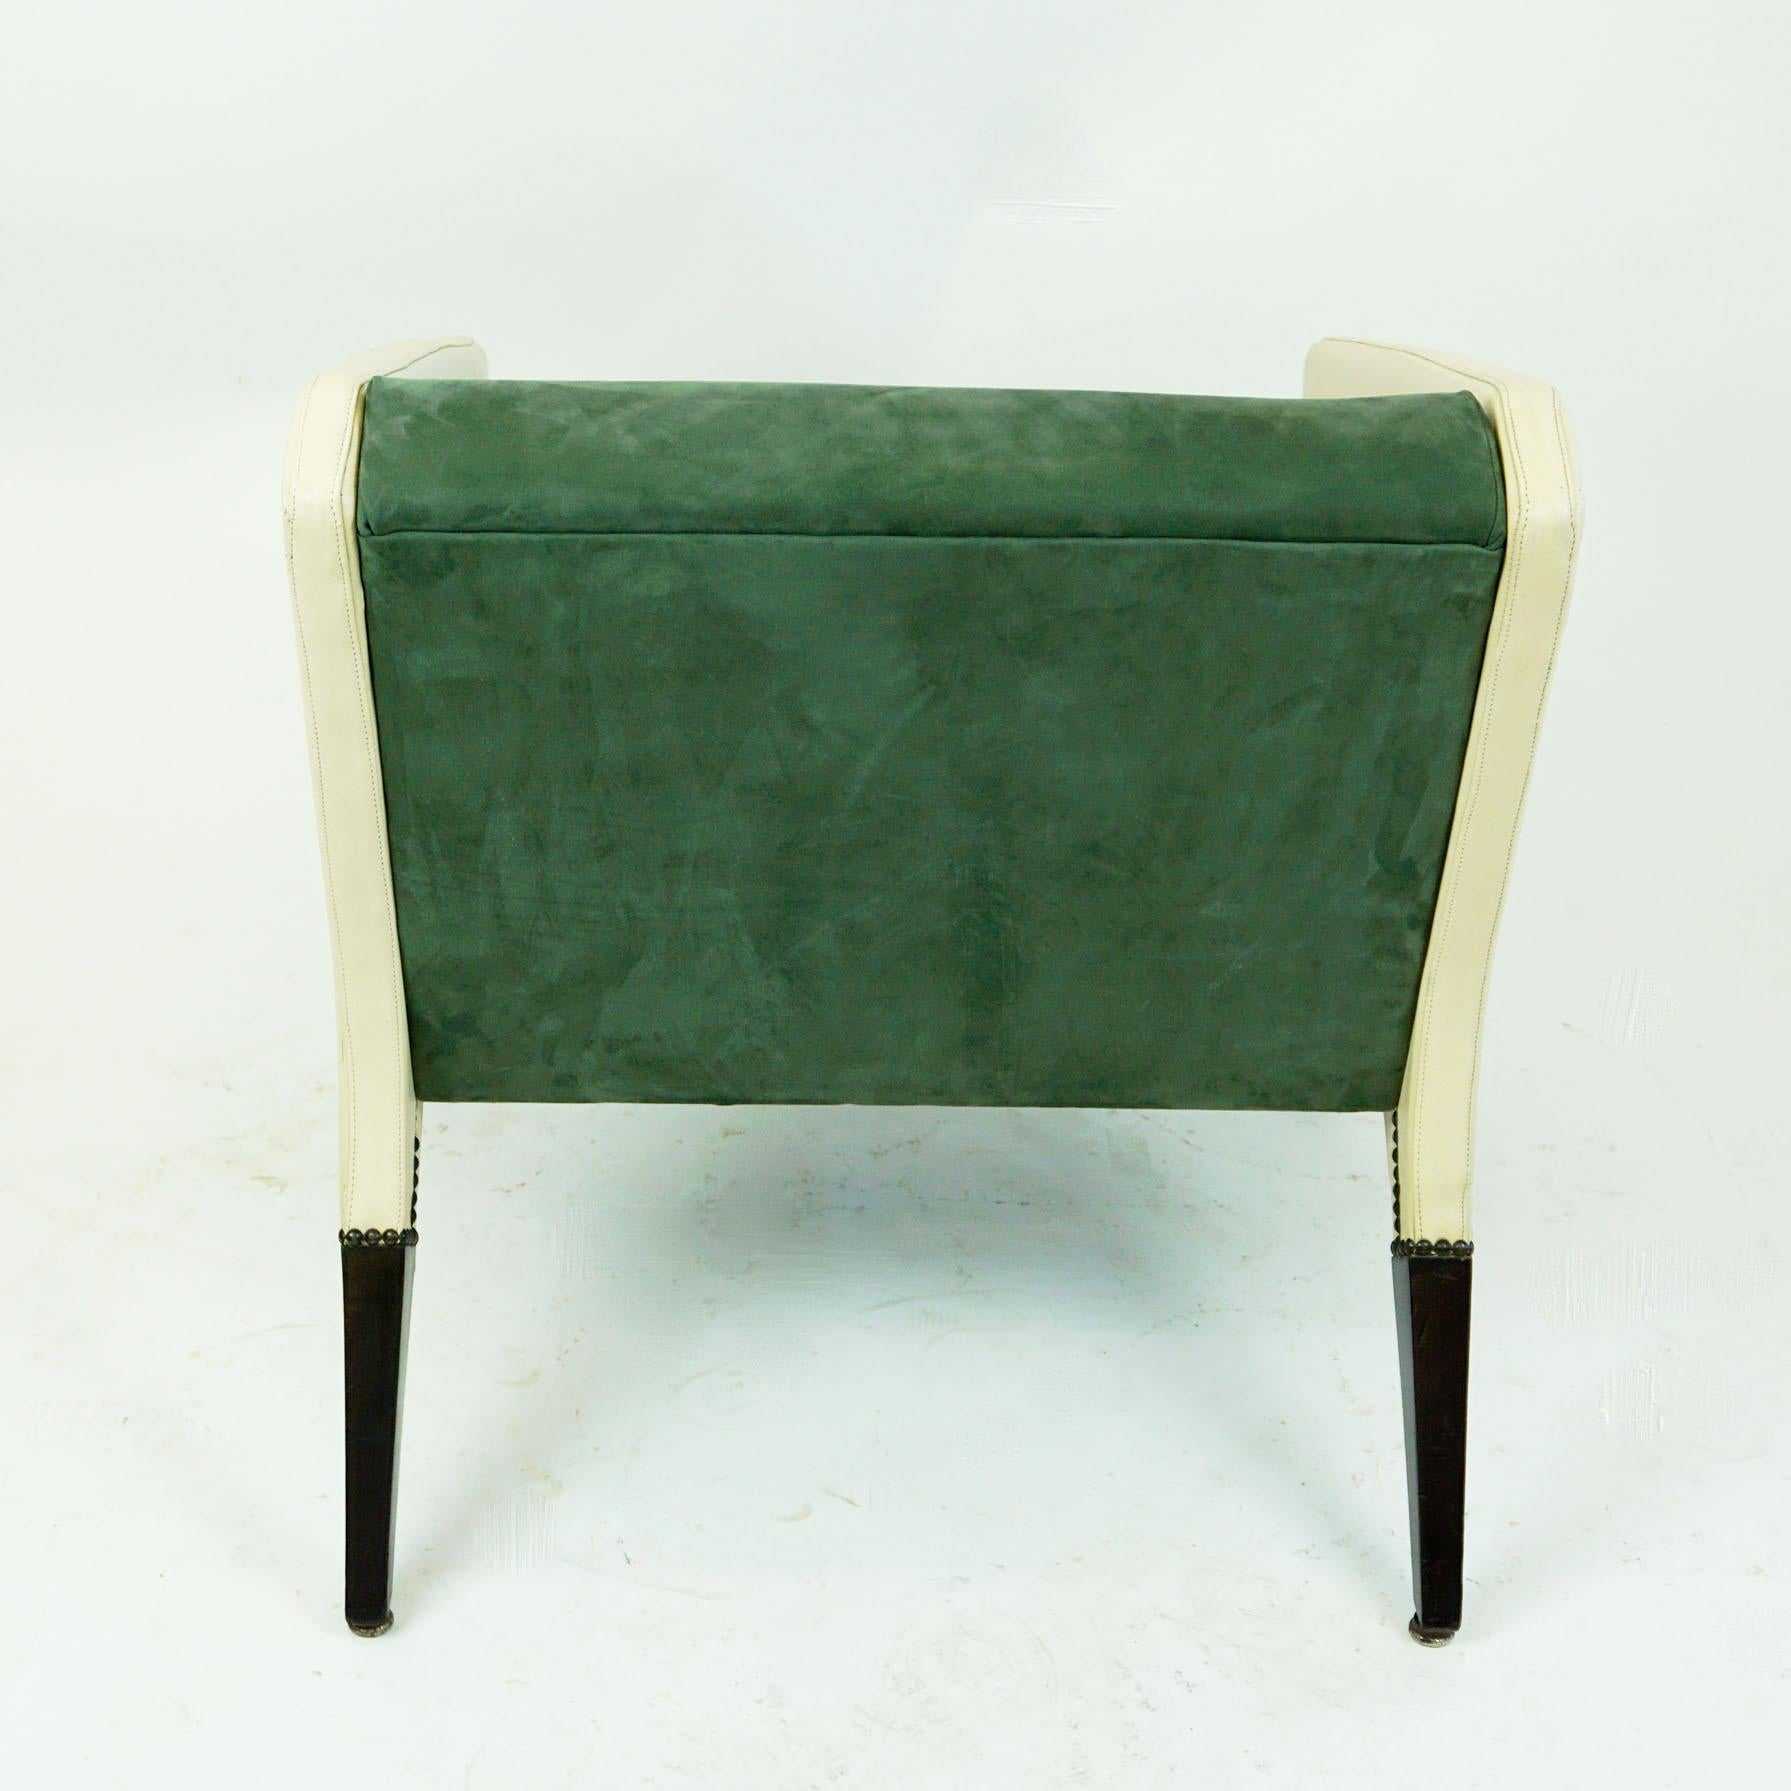 Italian Midcentury Parco dei Principi Lounge Chair by Gio Ponti for Cassina 2